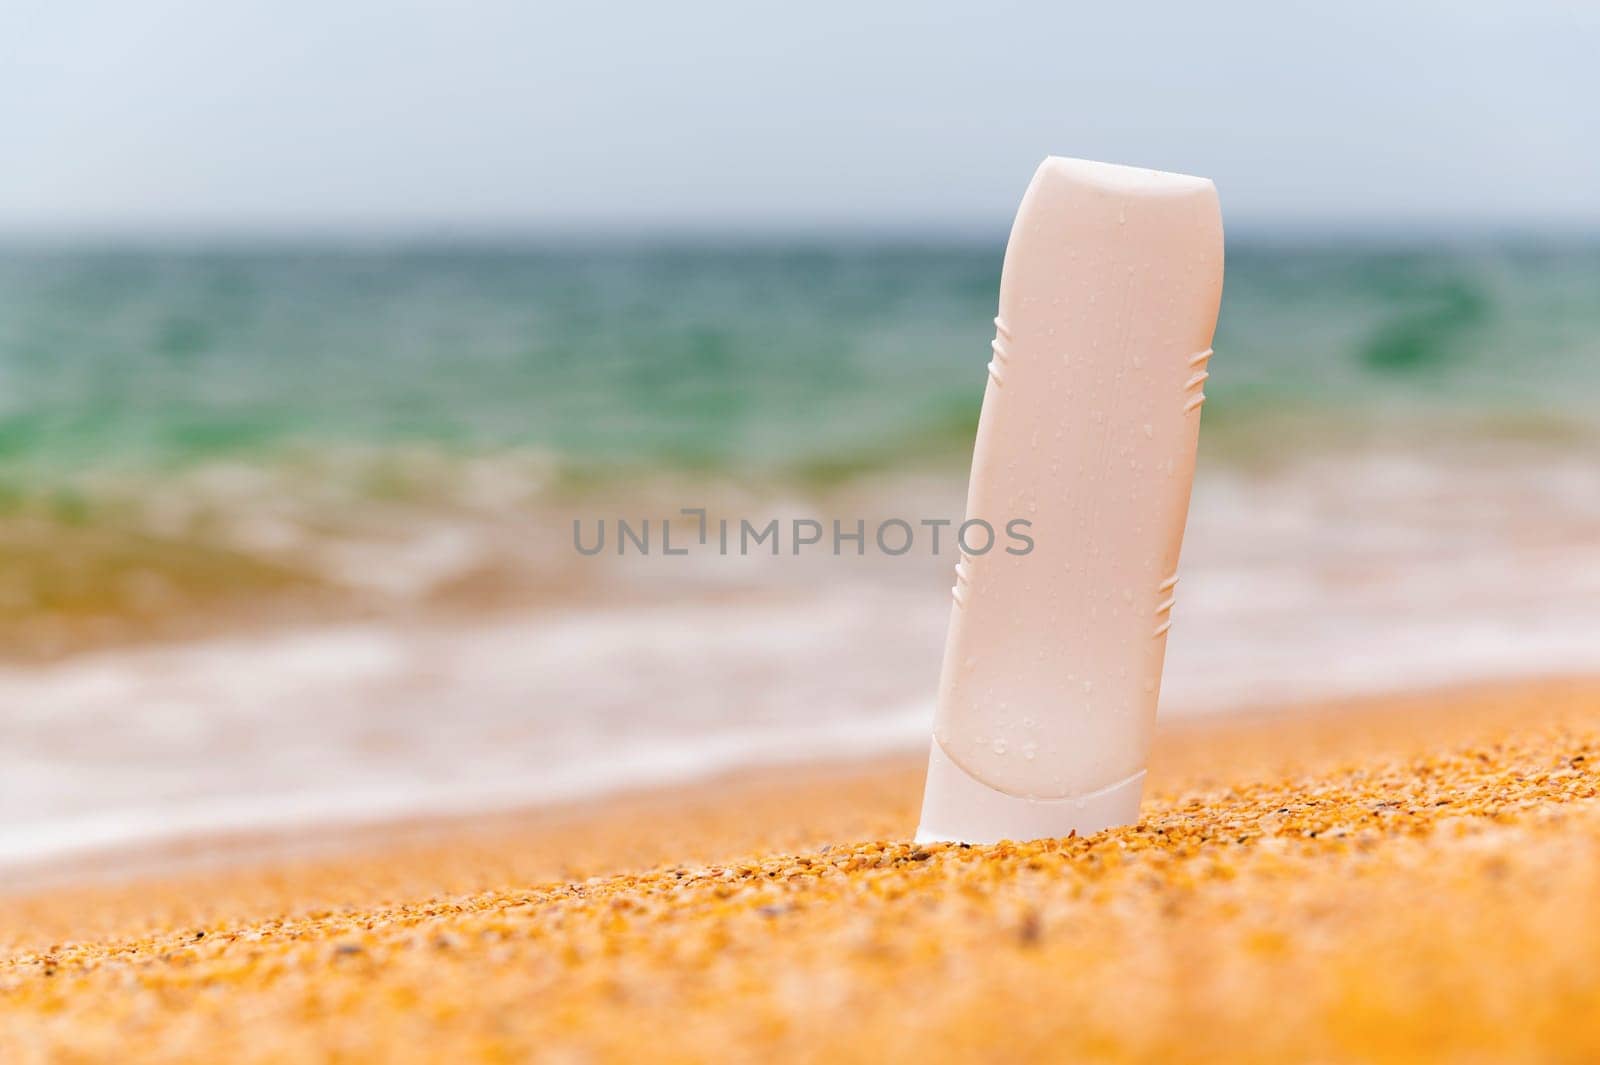 Bottle with sunscreen lotion on the beach, background of sea sky and waves, close-up. Layout for advertising a beauty product.